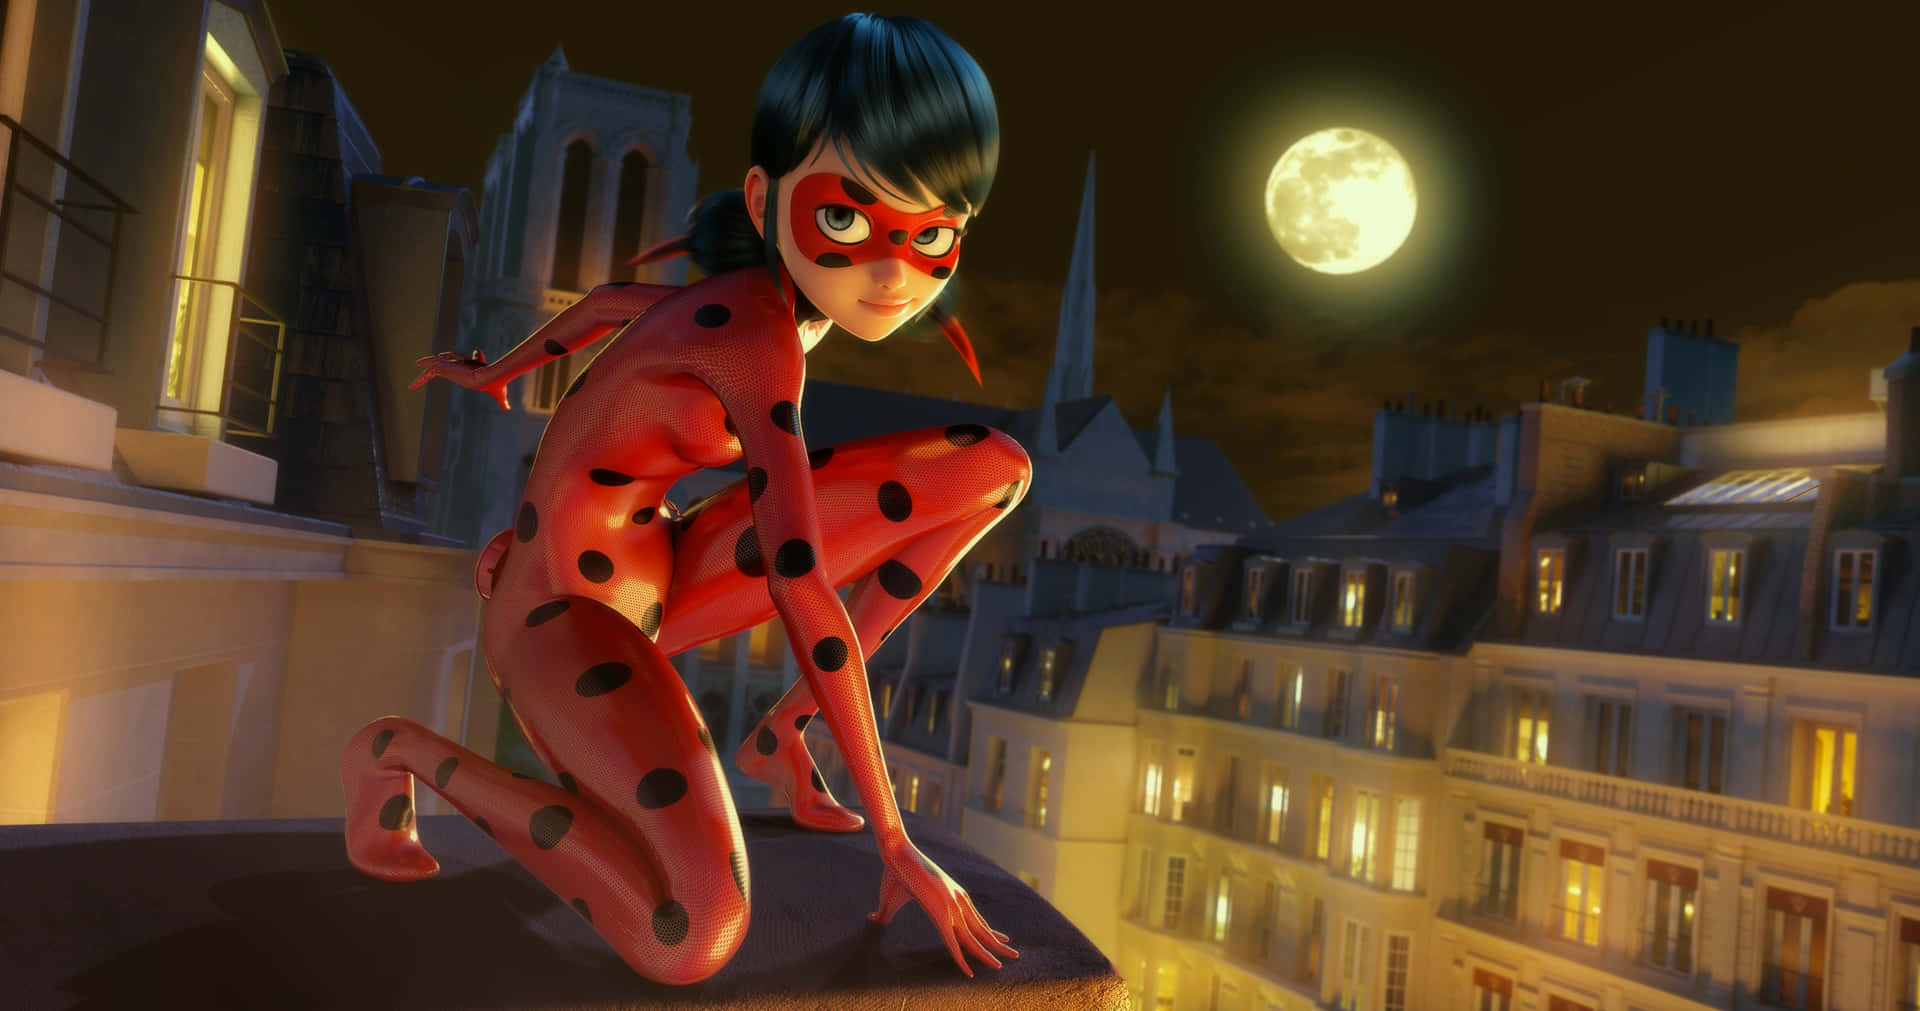 Ladybug and Chat Noir team up to save Paris!